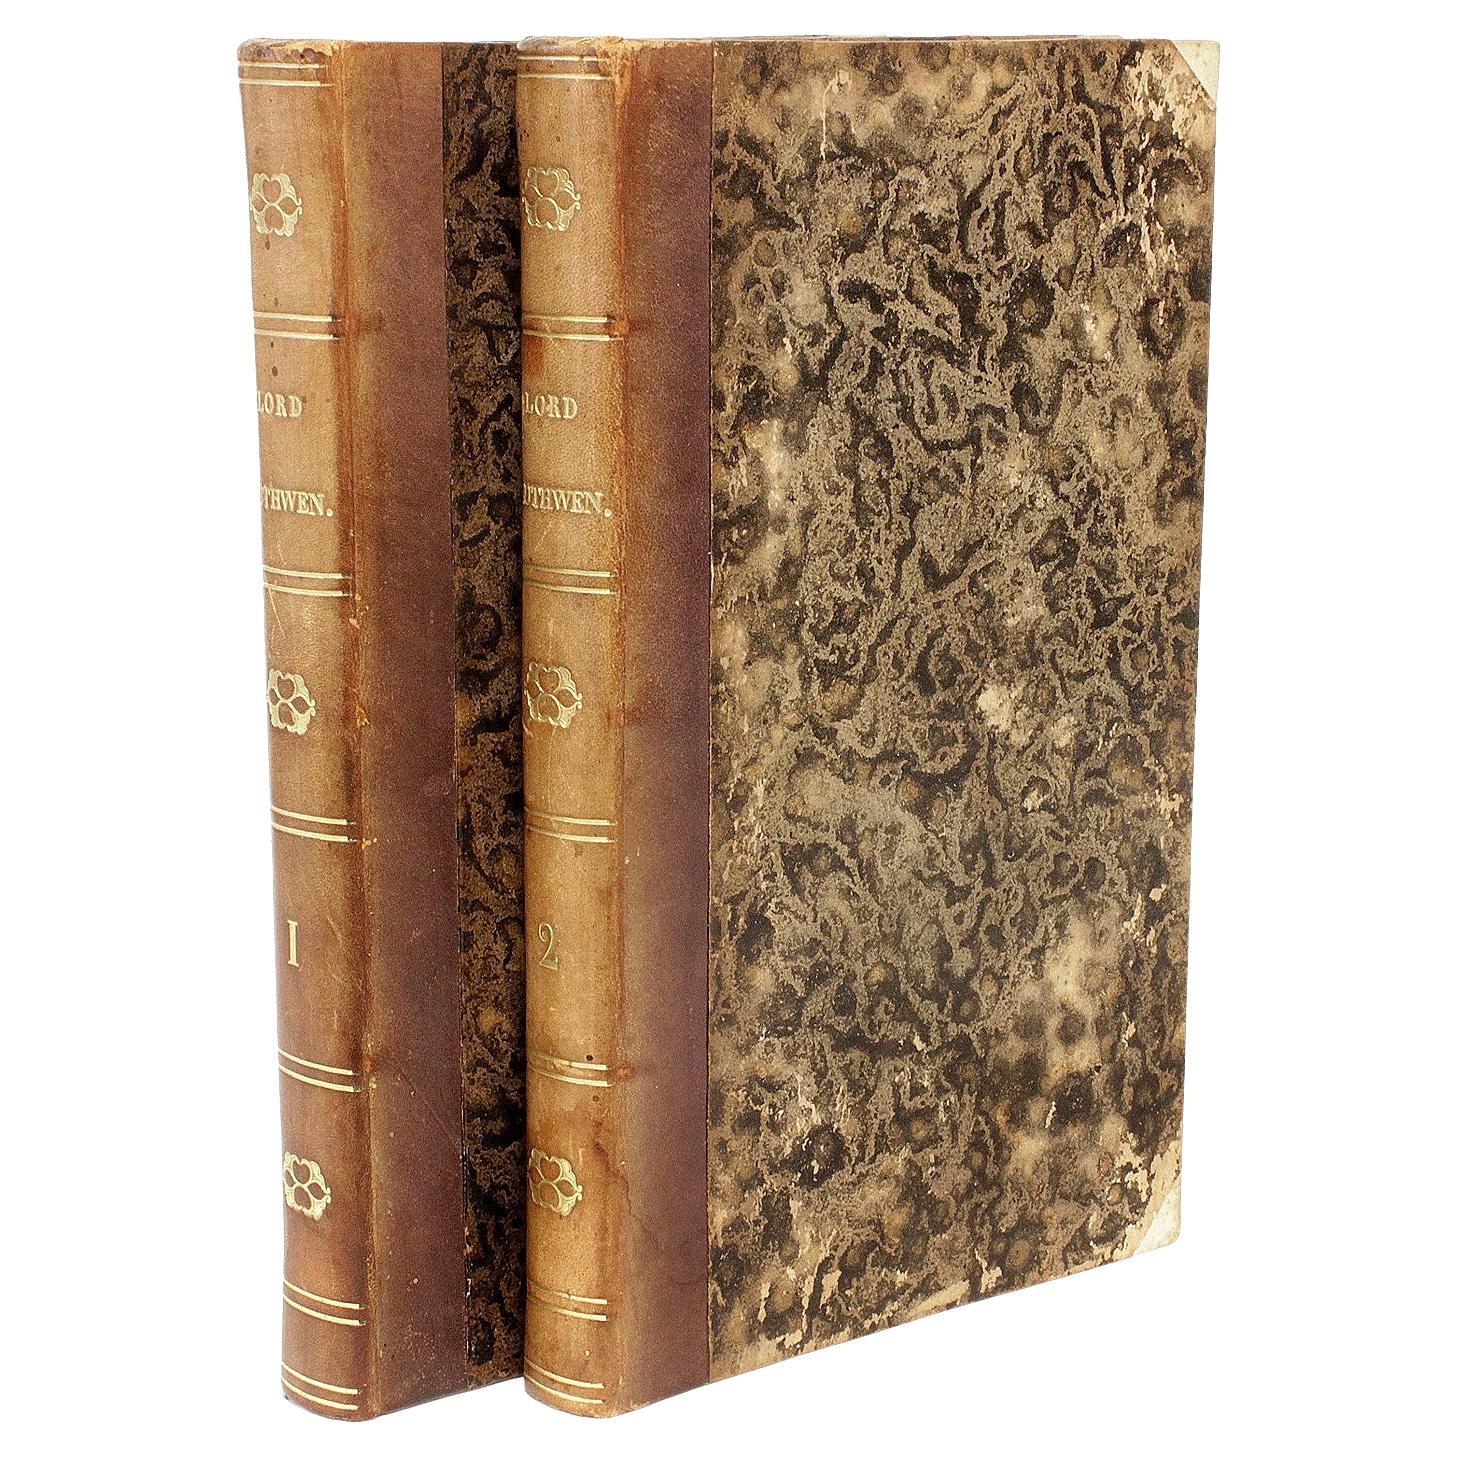 Cyprien Berard - Lord Ruthwen, ou Les Vampires - 1820 - FIRST FRENCH EDITION For Sale